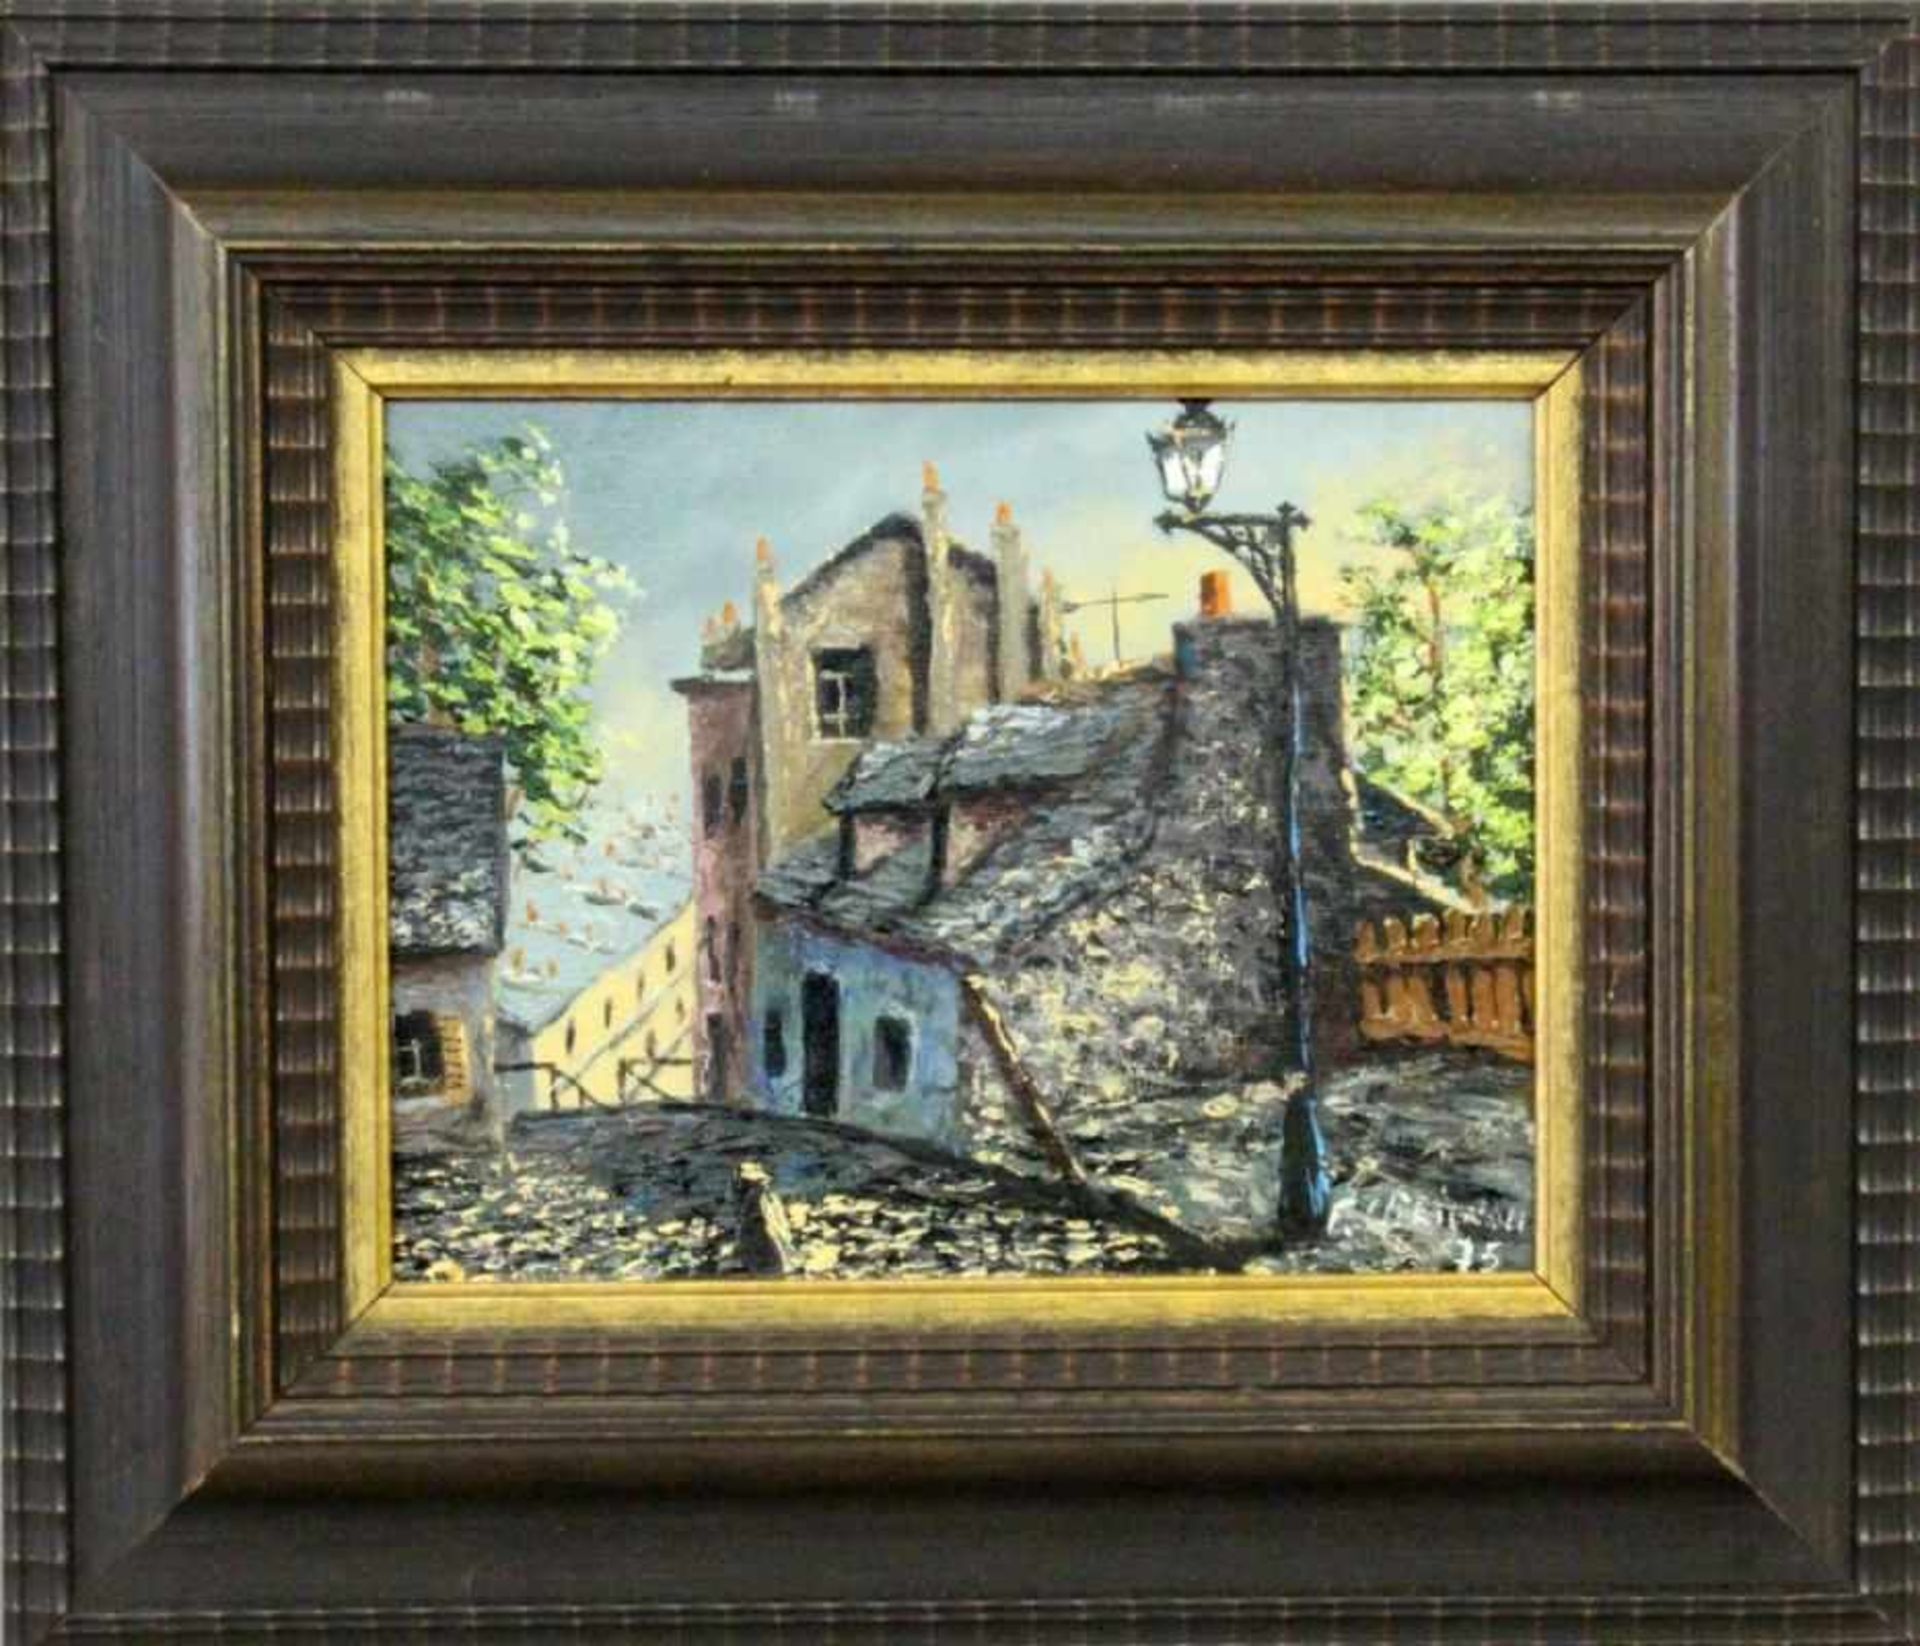 CREIGNOU, F. Paris 20th century House on Rue Mont-Cenis in Paris. Oil on canvas, signedand dated: (